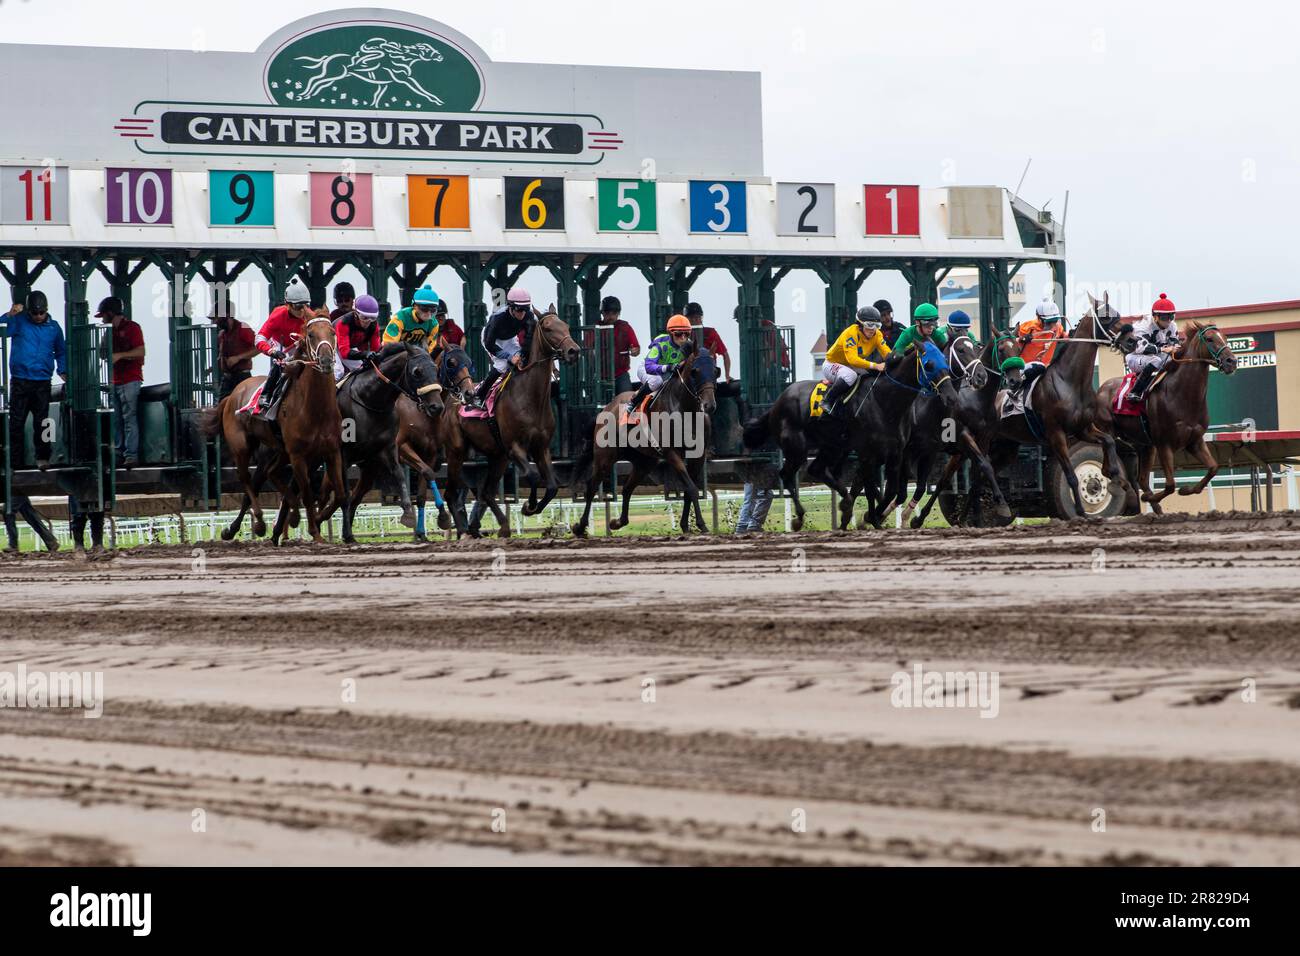 Shakopee, Minnesota. Canterbury Park. Horses pulling out of the starting gate to start the race. Stock Photo